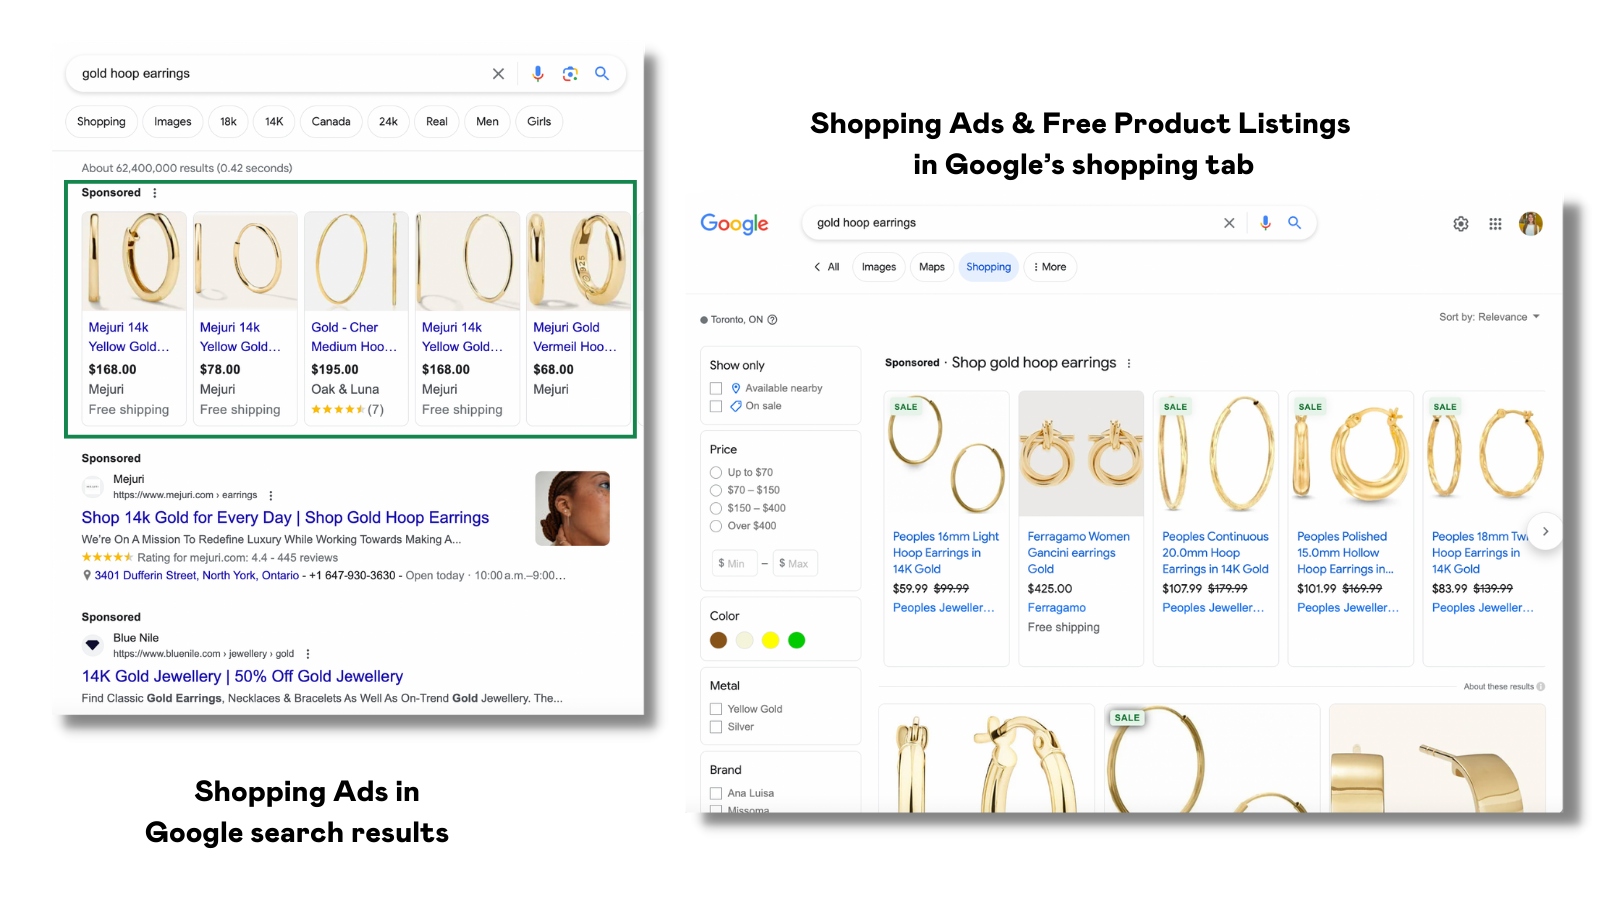 Google Shopping: What is it and how does it work?